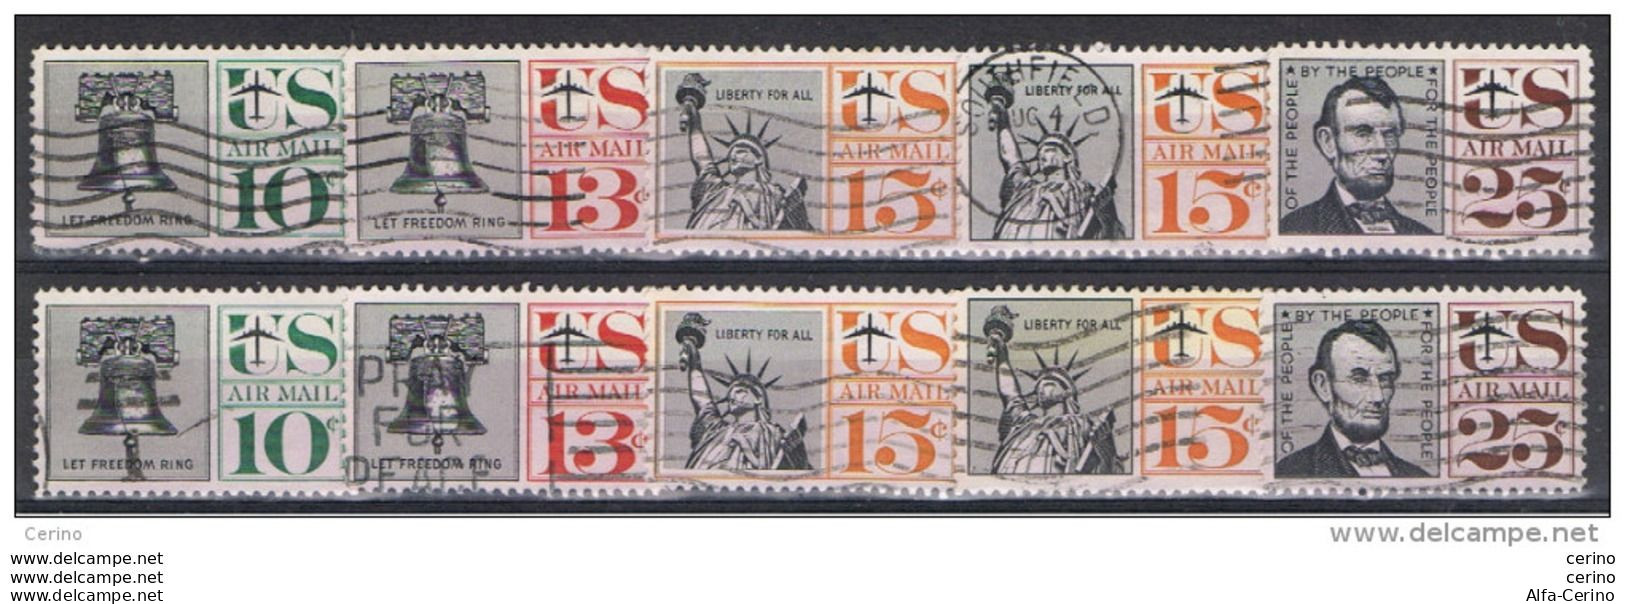 U.S.A.:  1959/61  AIR  MAIL  -  KOMPLET  SET  5  USED  STAMPS  -  REP.  2  EXEMPLARY  -  YV/TELL. 56/60 - 2a. 1941-1960 Oblitérés